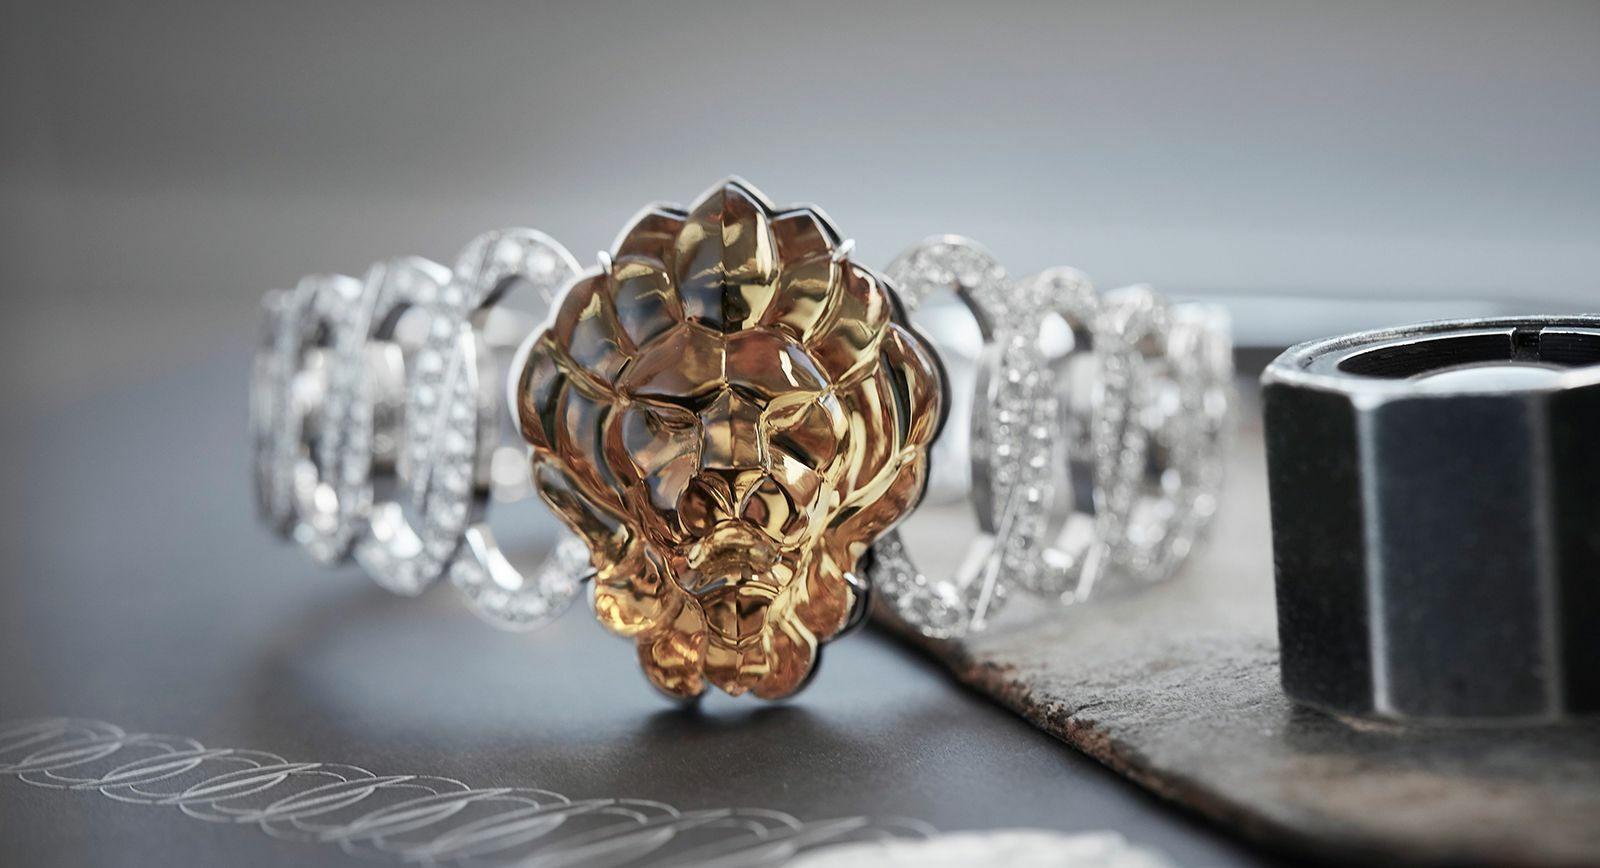 L’Esprit du Lion: a New High Jewellery Collection by Chanel